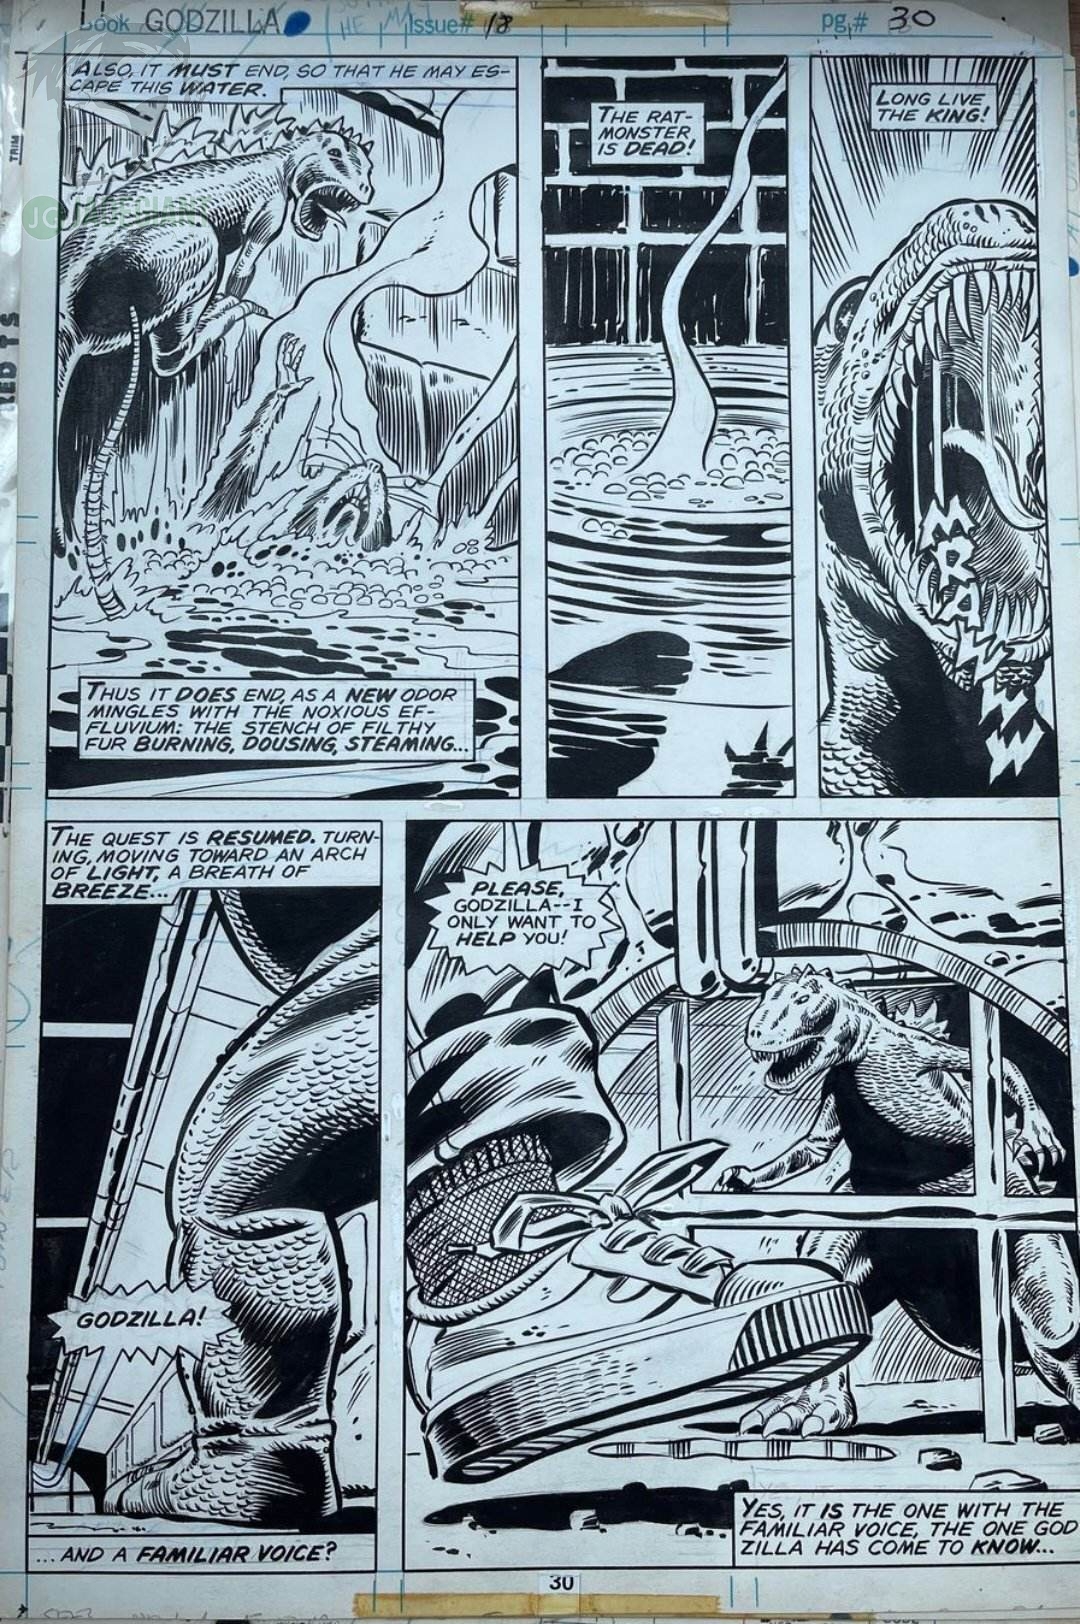 1979 Godzilla King of the Monsters Issue 18 Page 30 by Herb Trimpe and Dan Green Comic Art